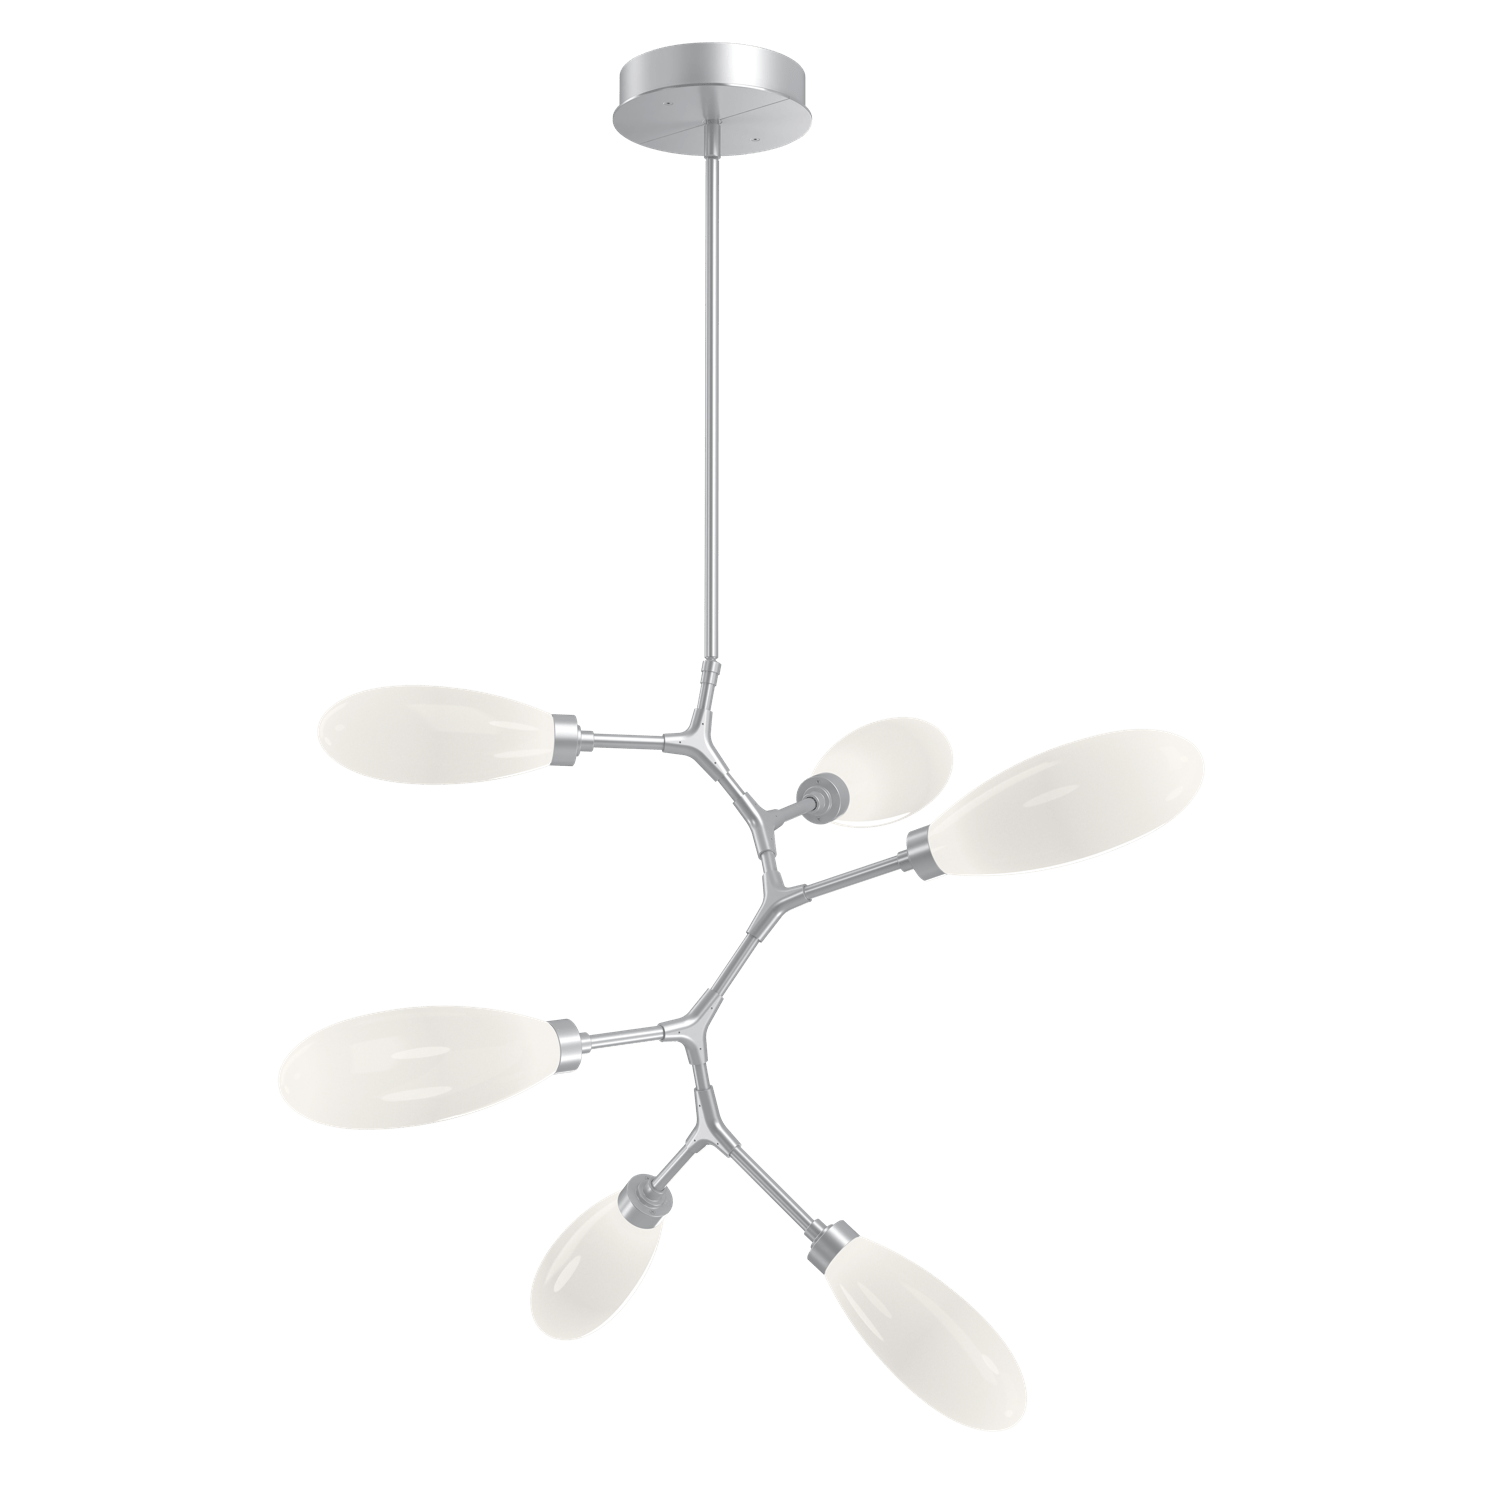 CHB0071-VA-CS-WL-LL-Hammerton-Studio-Fiori-6-light-organic-vine-chandelier-with-classic-silver-finish-and-opal-white-glass-shades-and-LED-lamping